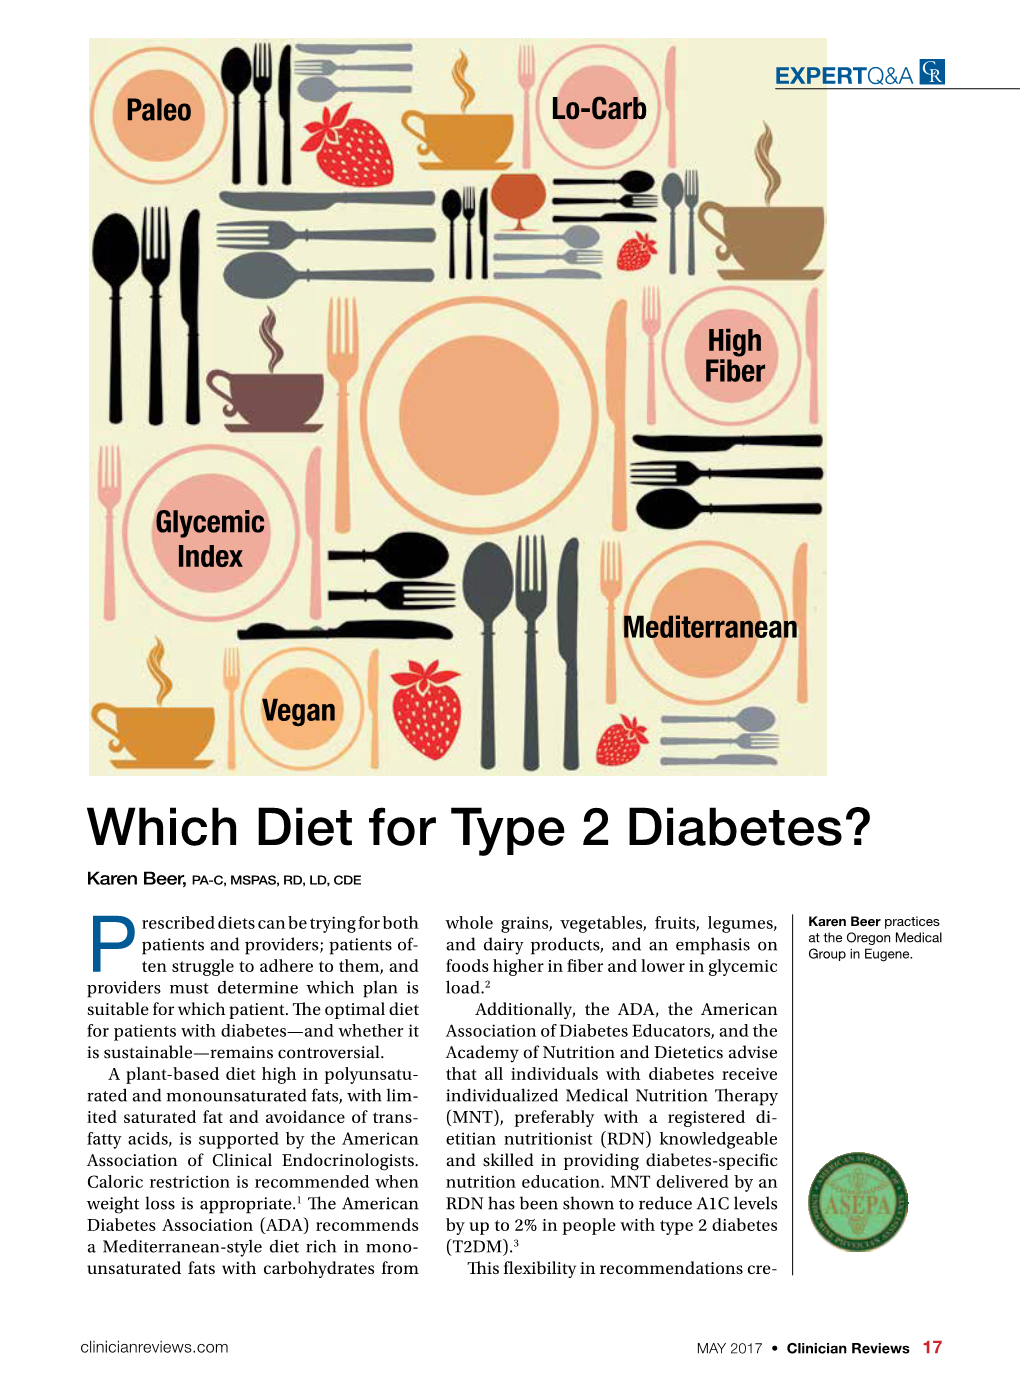 Which Diet for Type 2 Diabetes?